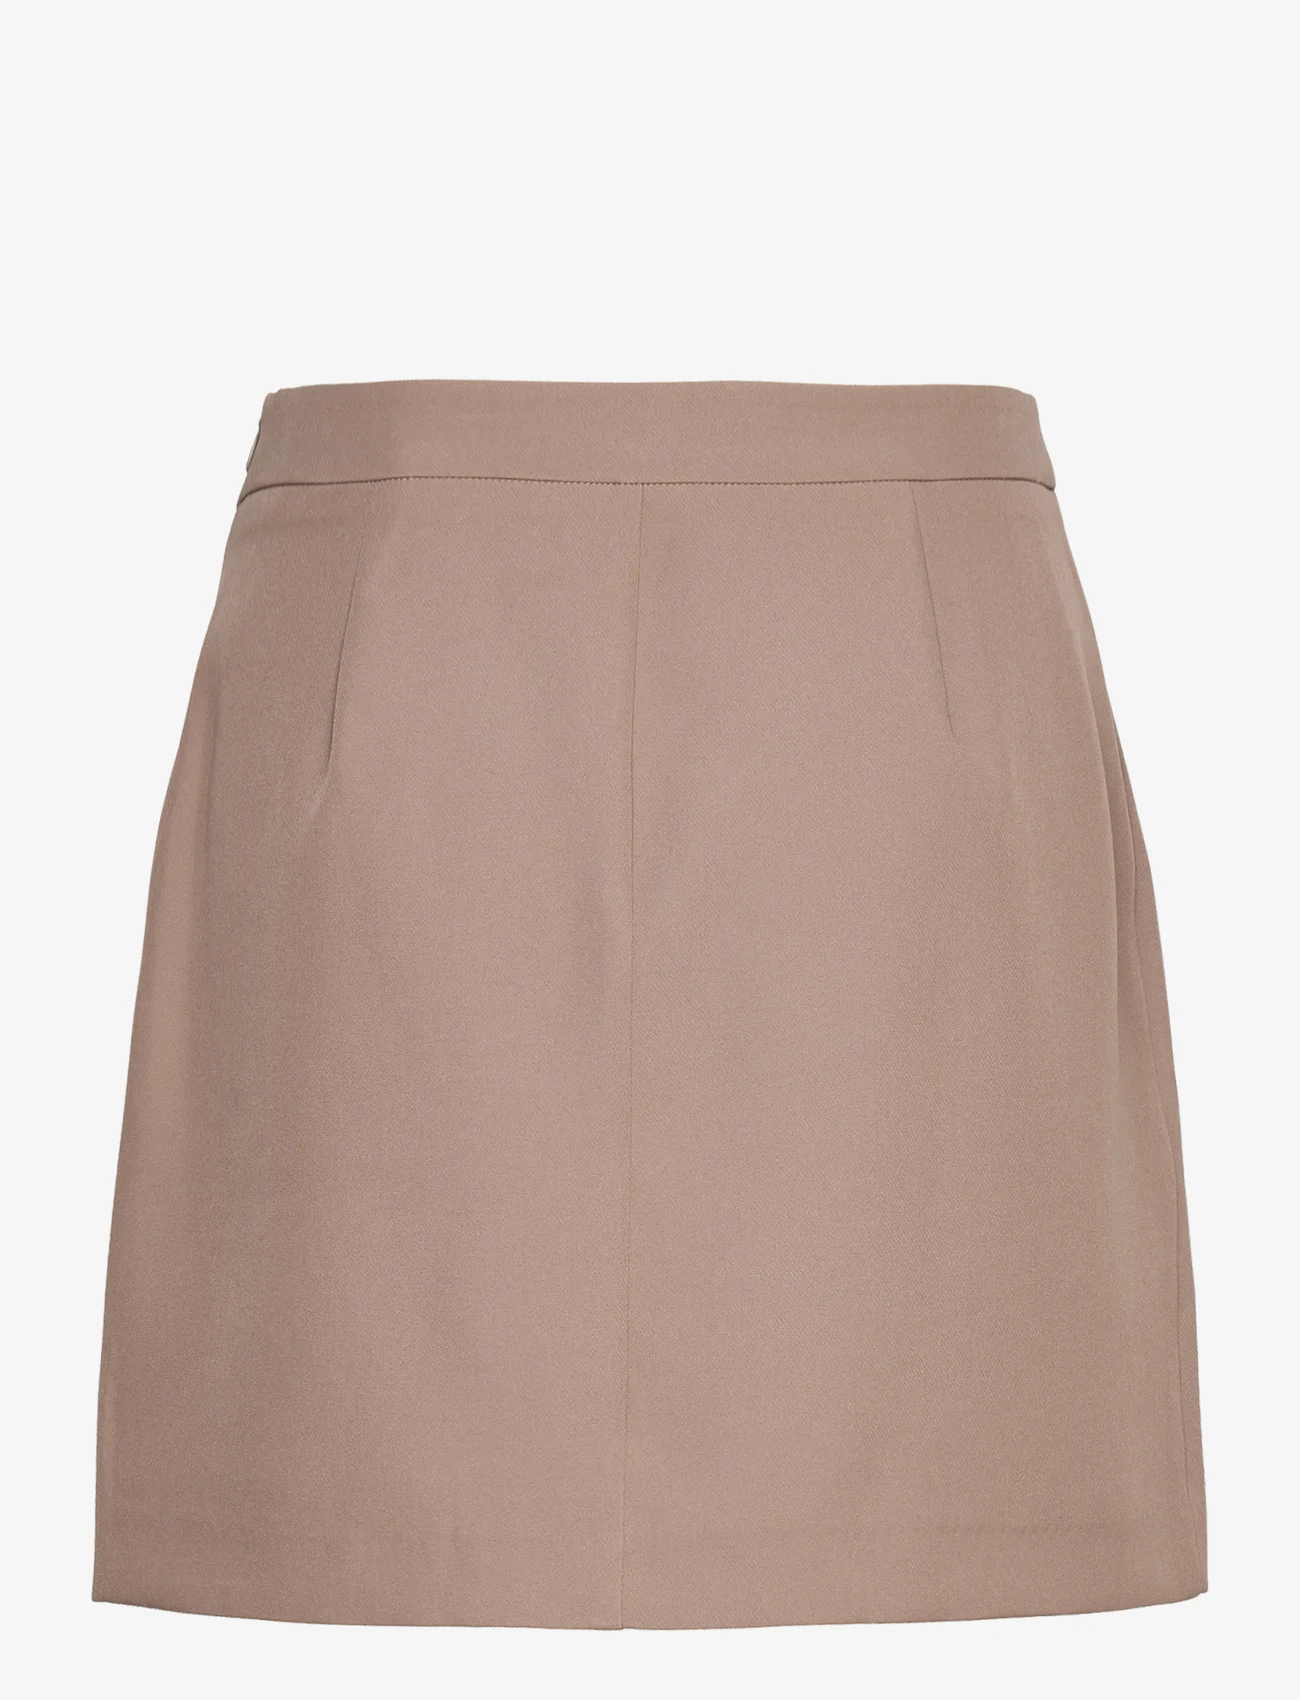 ONLY - ONLELLY LIFE SLIT SKIRT TLR - lowest prices - walnut - 1